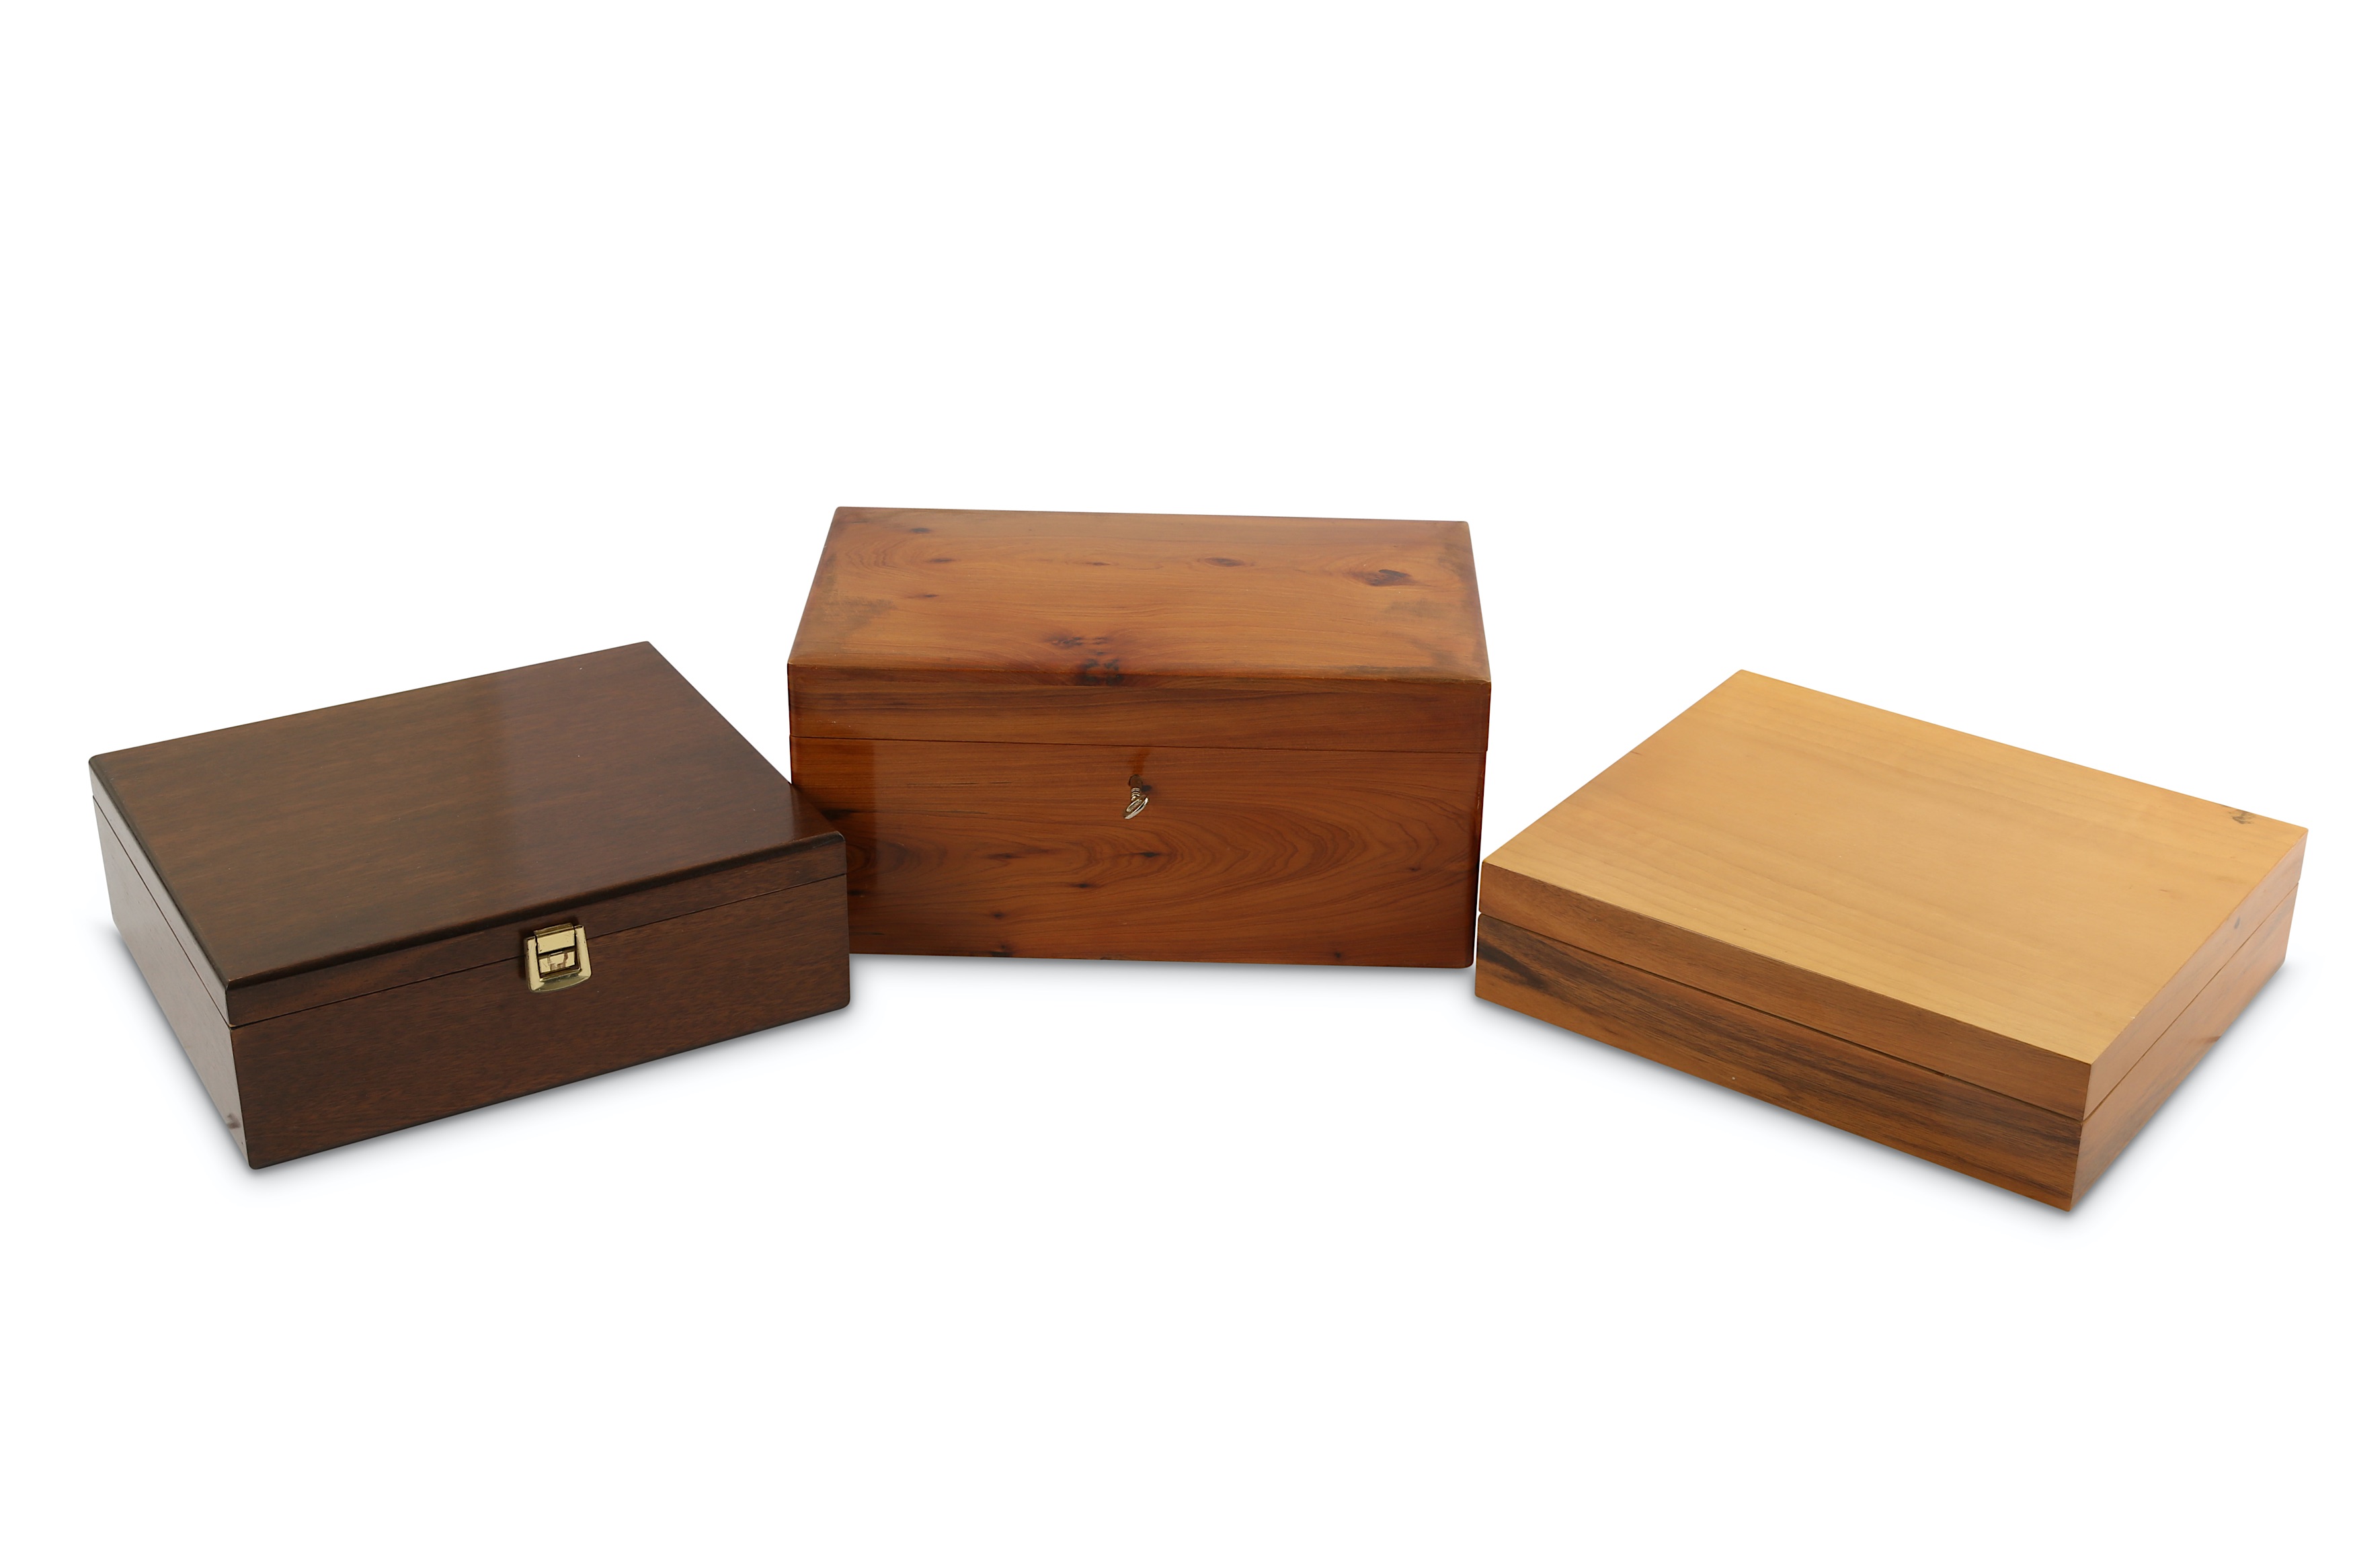 A mid to late 20th century yew veneered humidor with cedar wood interior and key, along with two